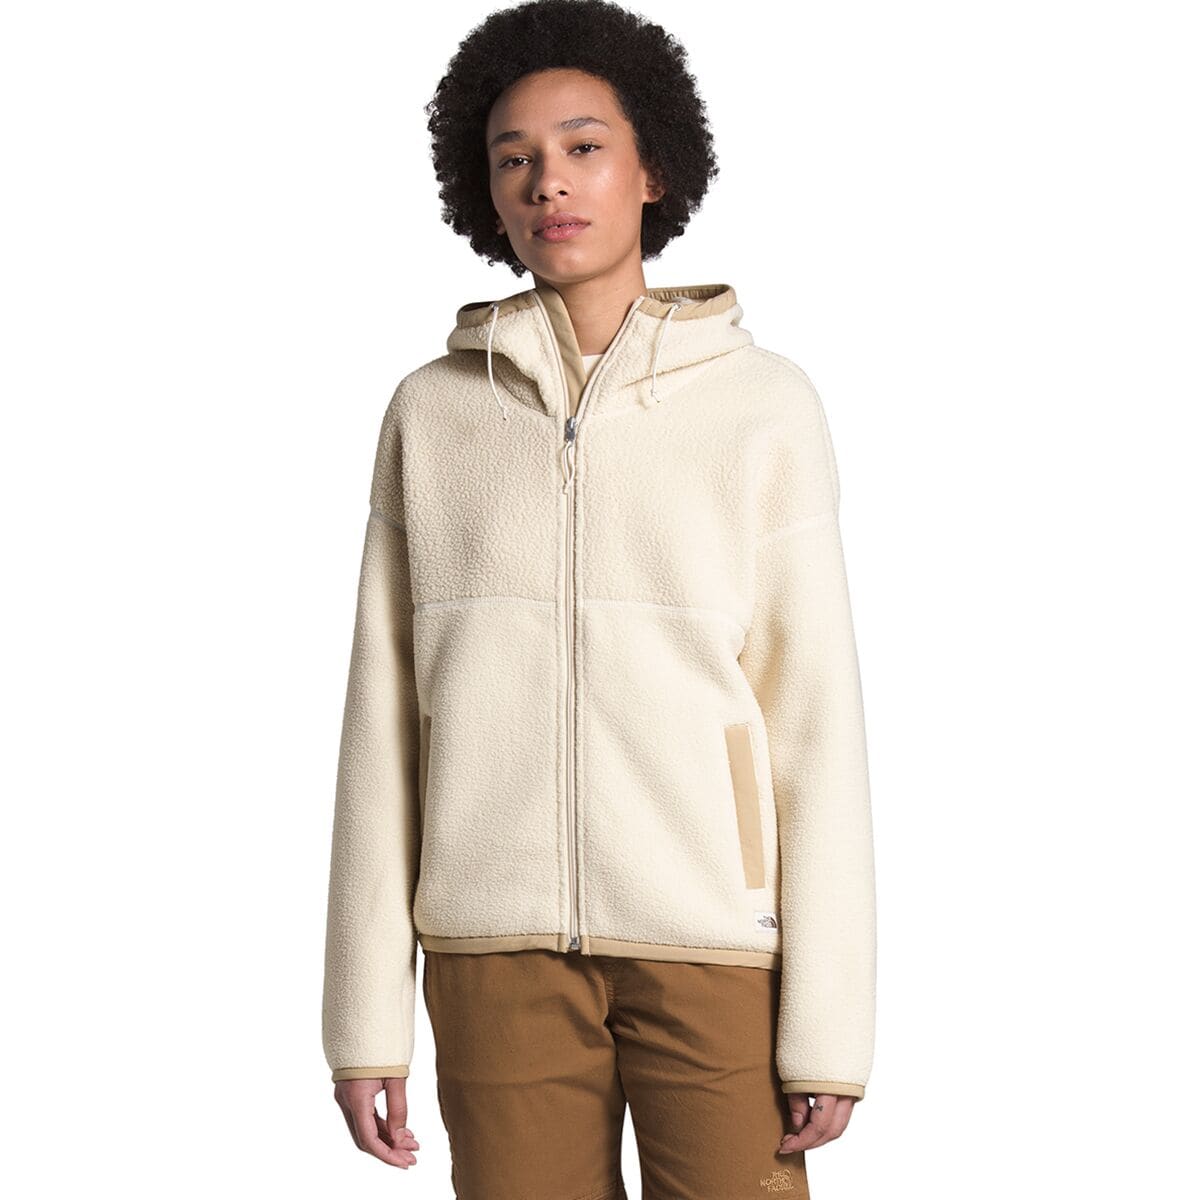 the north face fleece hoodie womens